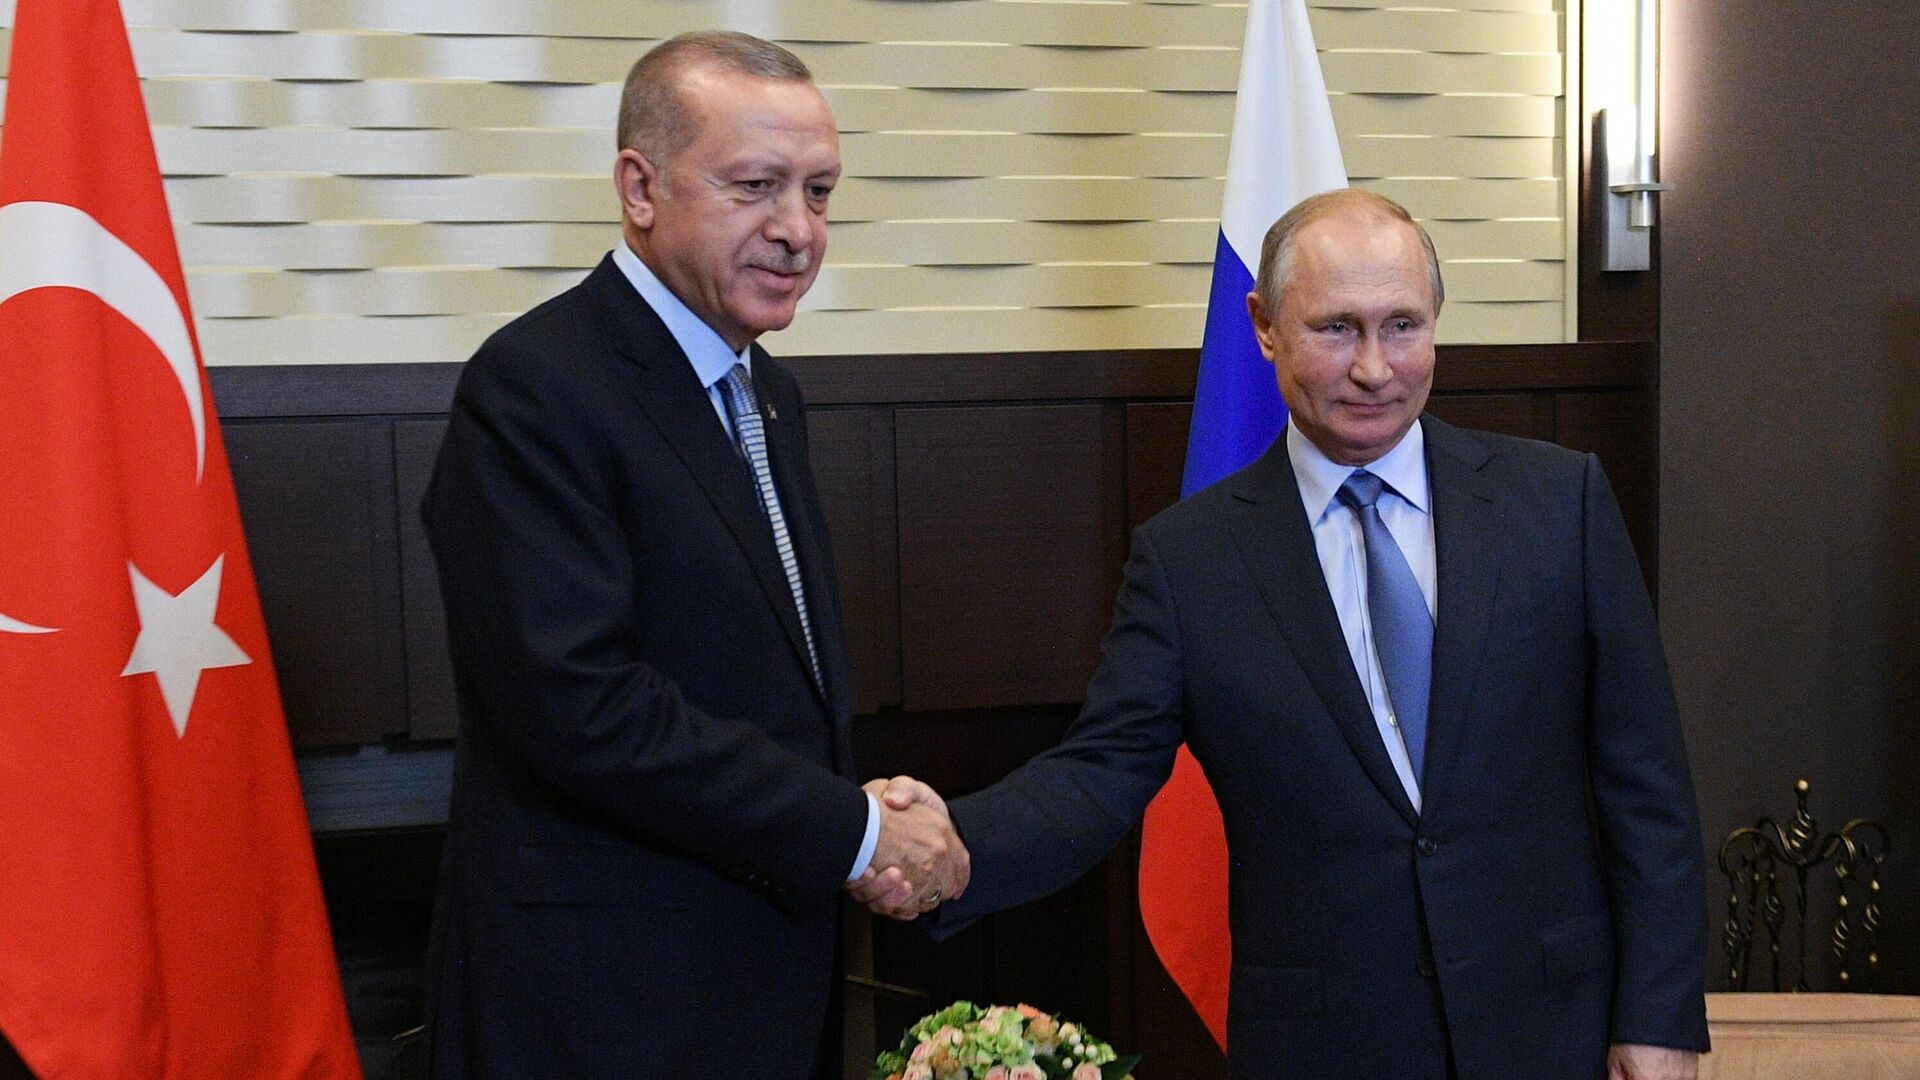 A source in Turkey has not confirmed information about Putin’s upcoming visit.